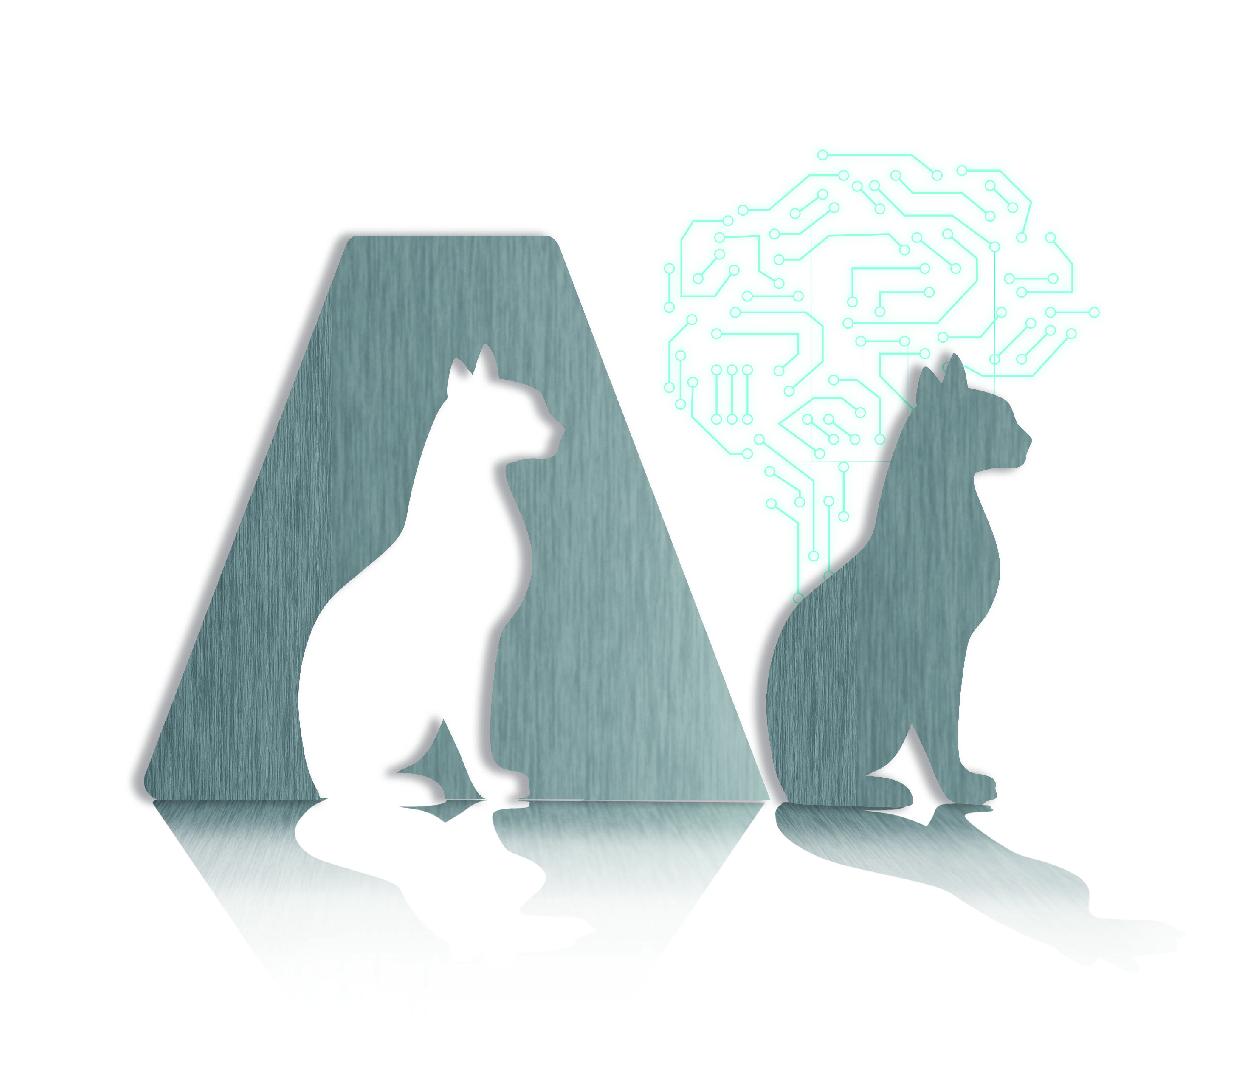 Artificial intelligence in the pet industry